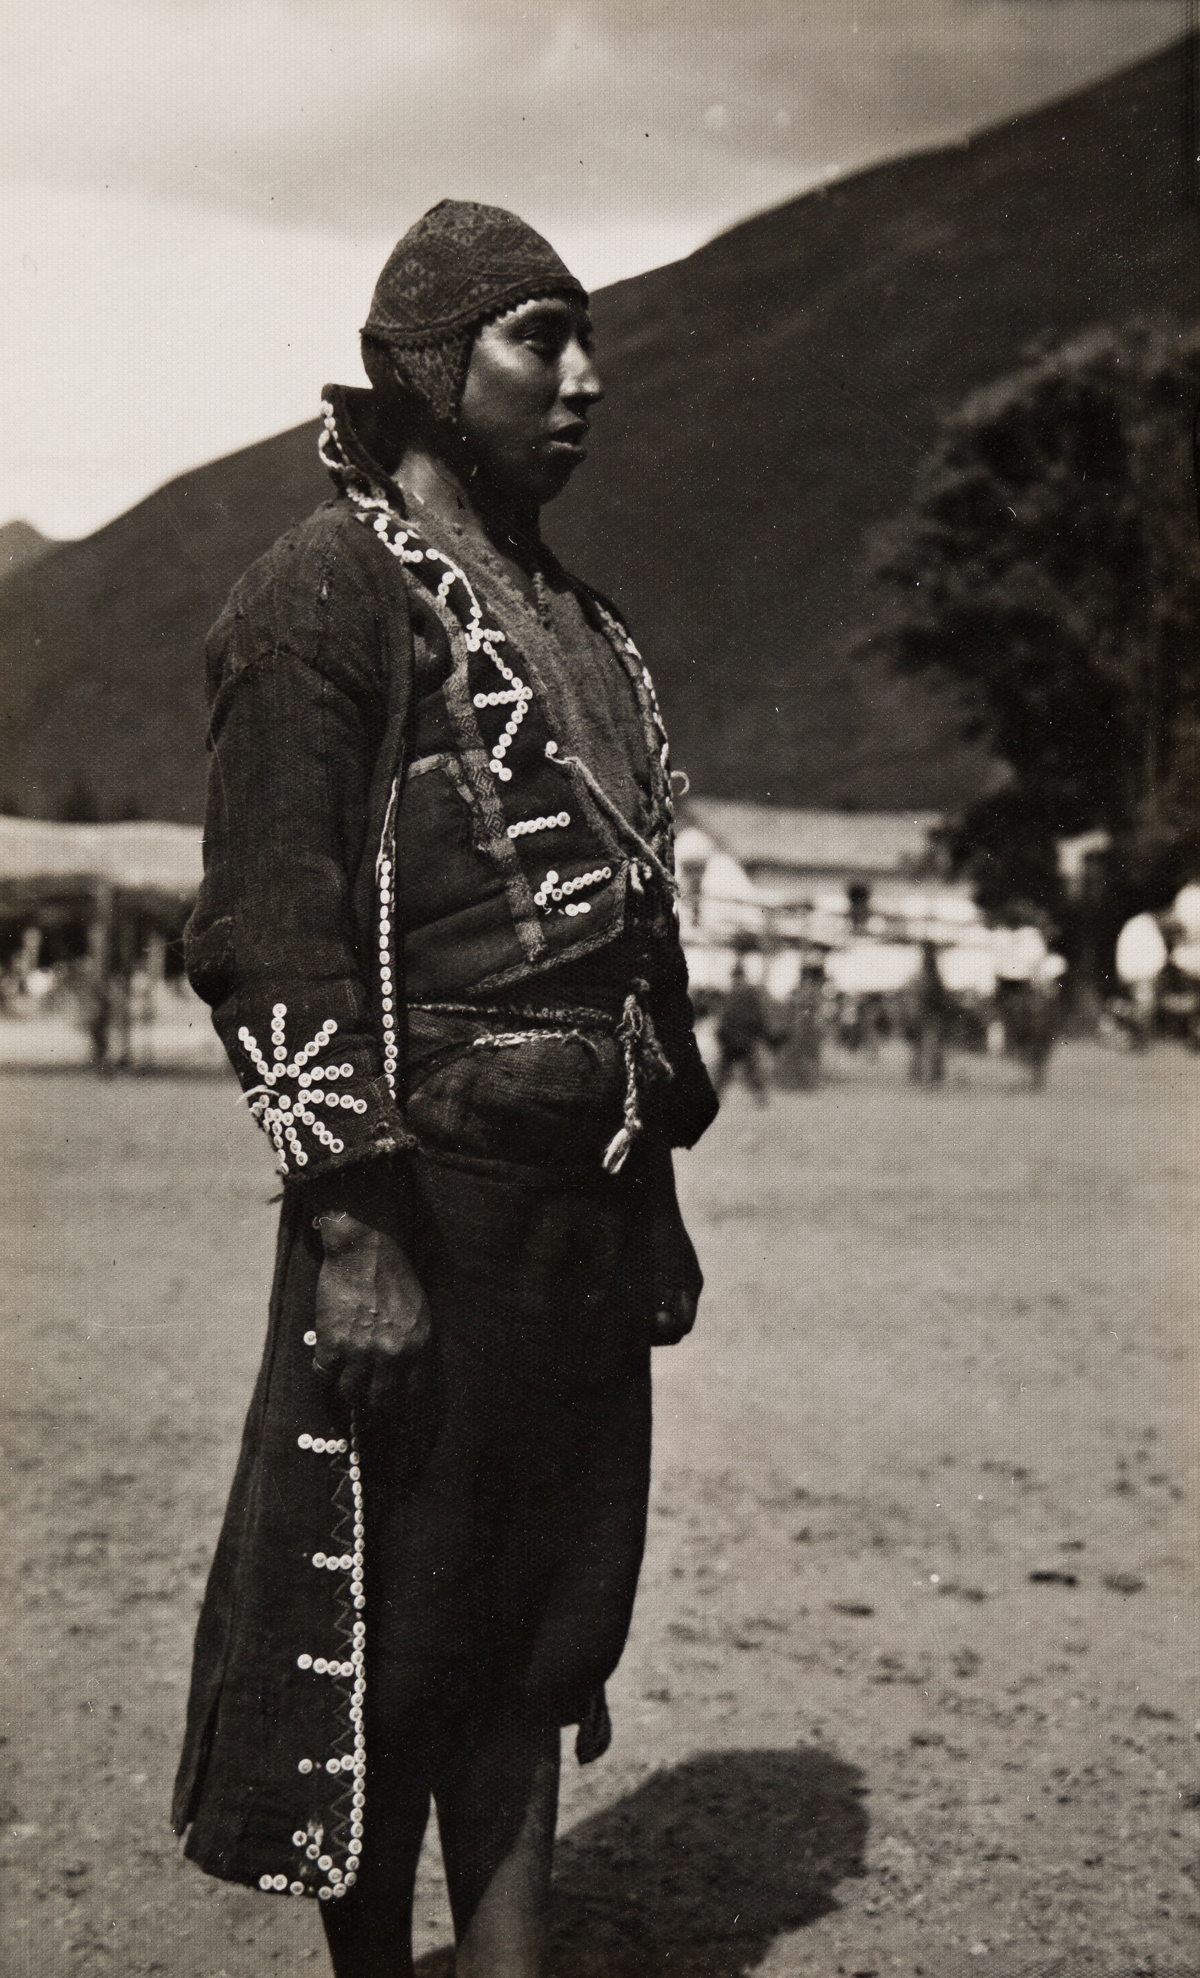 MARTIN CHAMBI (1891-1973) A group of 5 photographs from Cuzco, Peru, including three portraits and two landscapes.